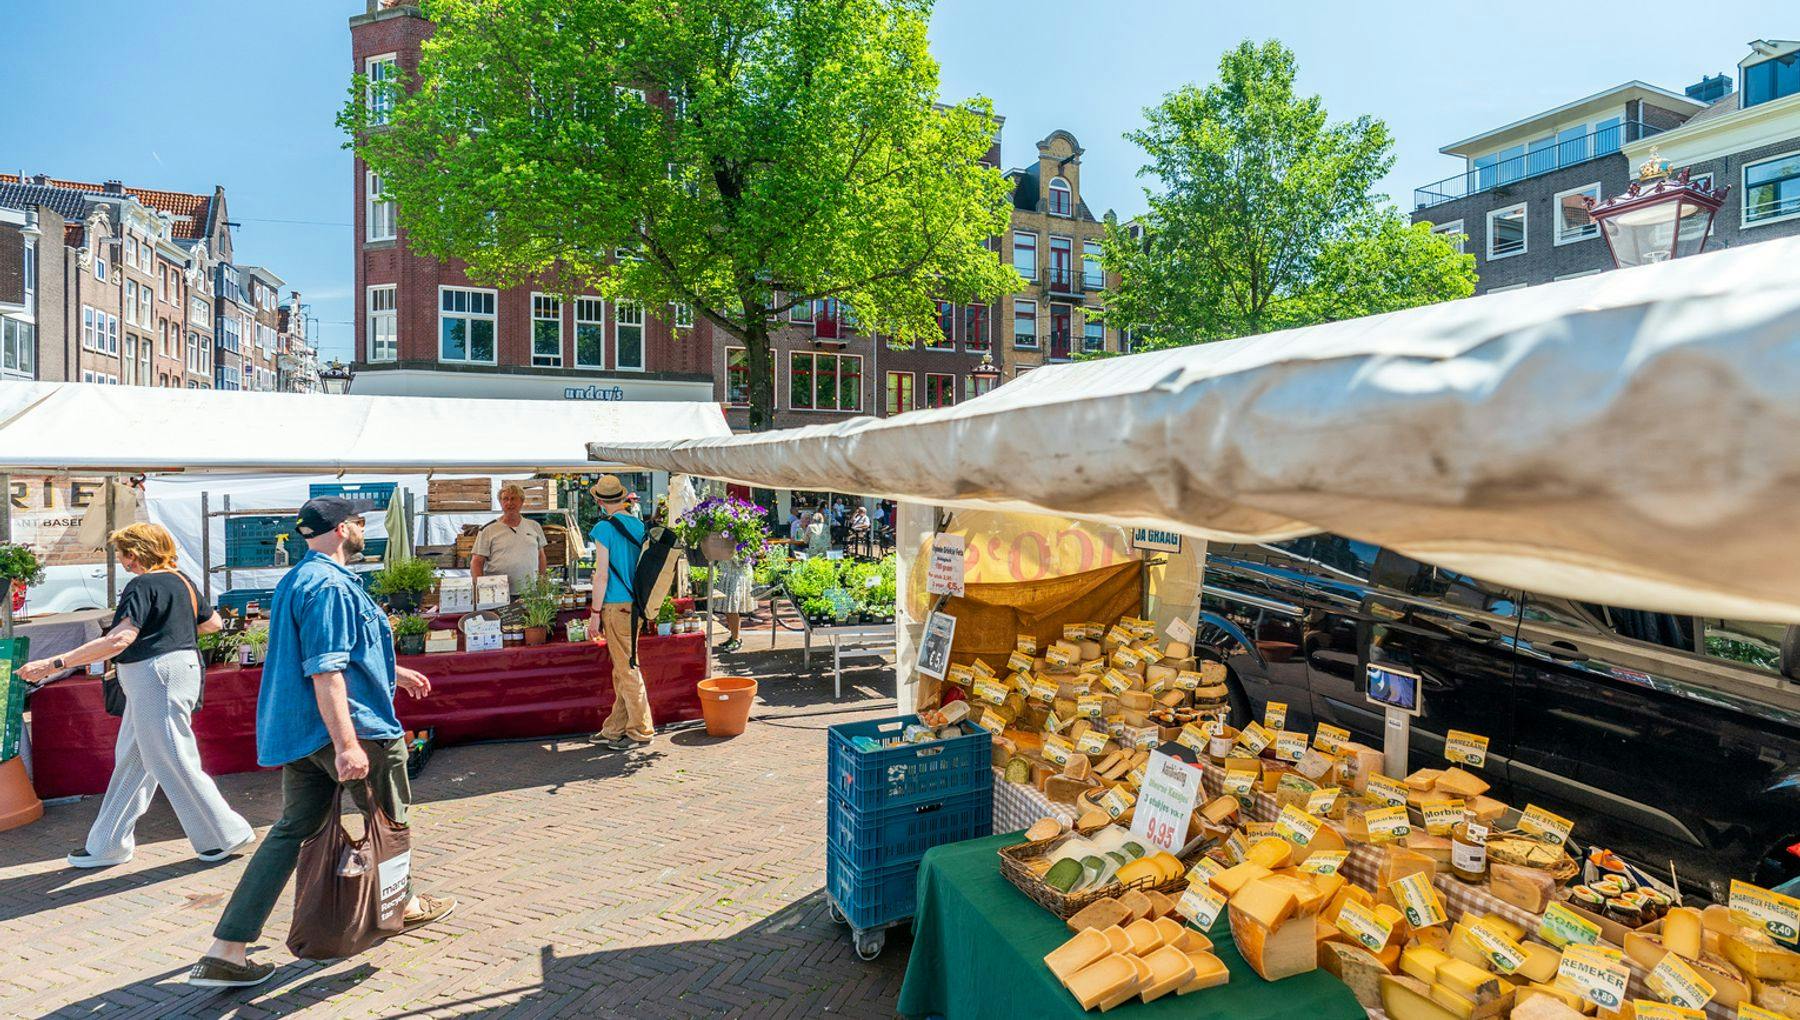 People shopping at the Haarlemmerplein Boerenmarket farmer's market cheese stall